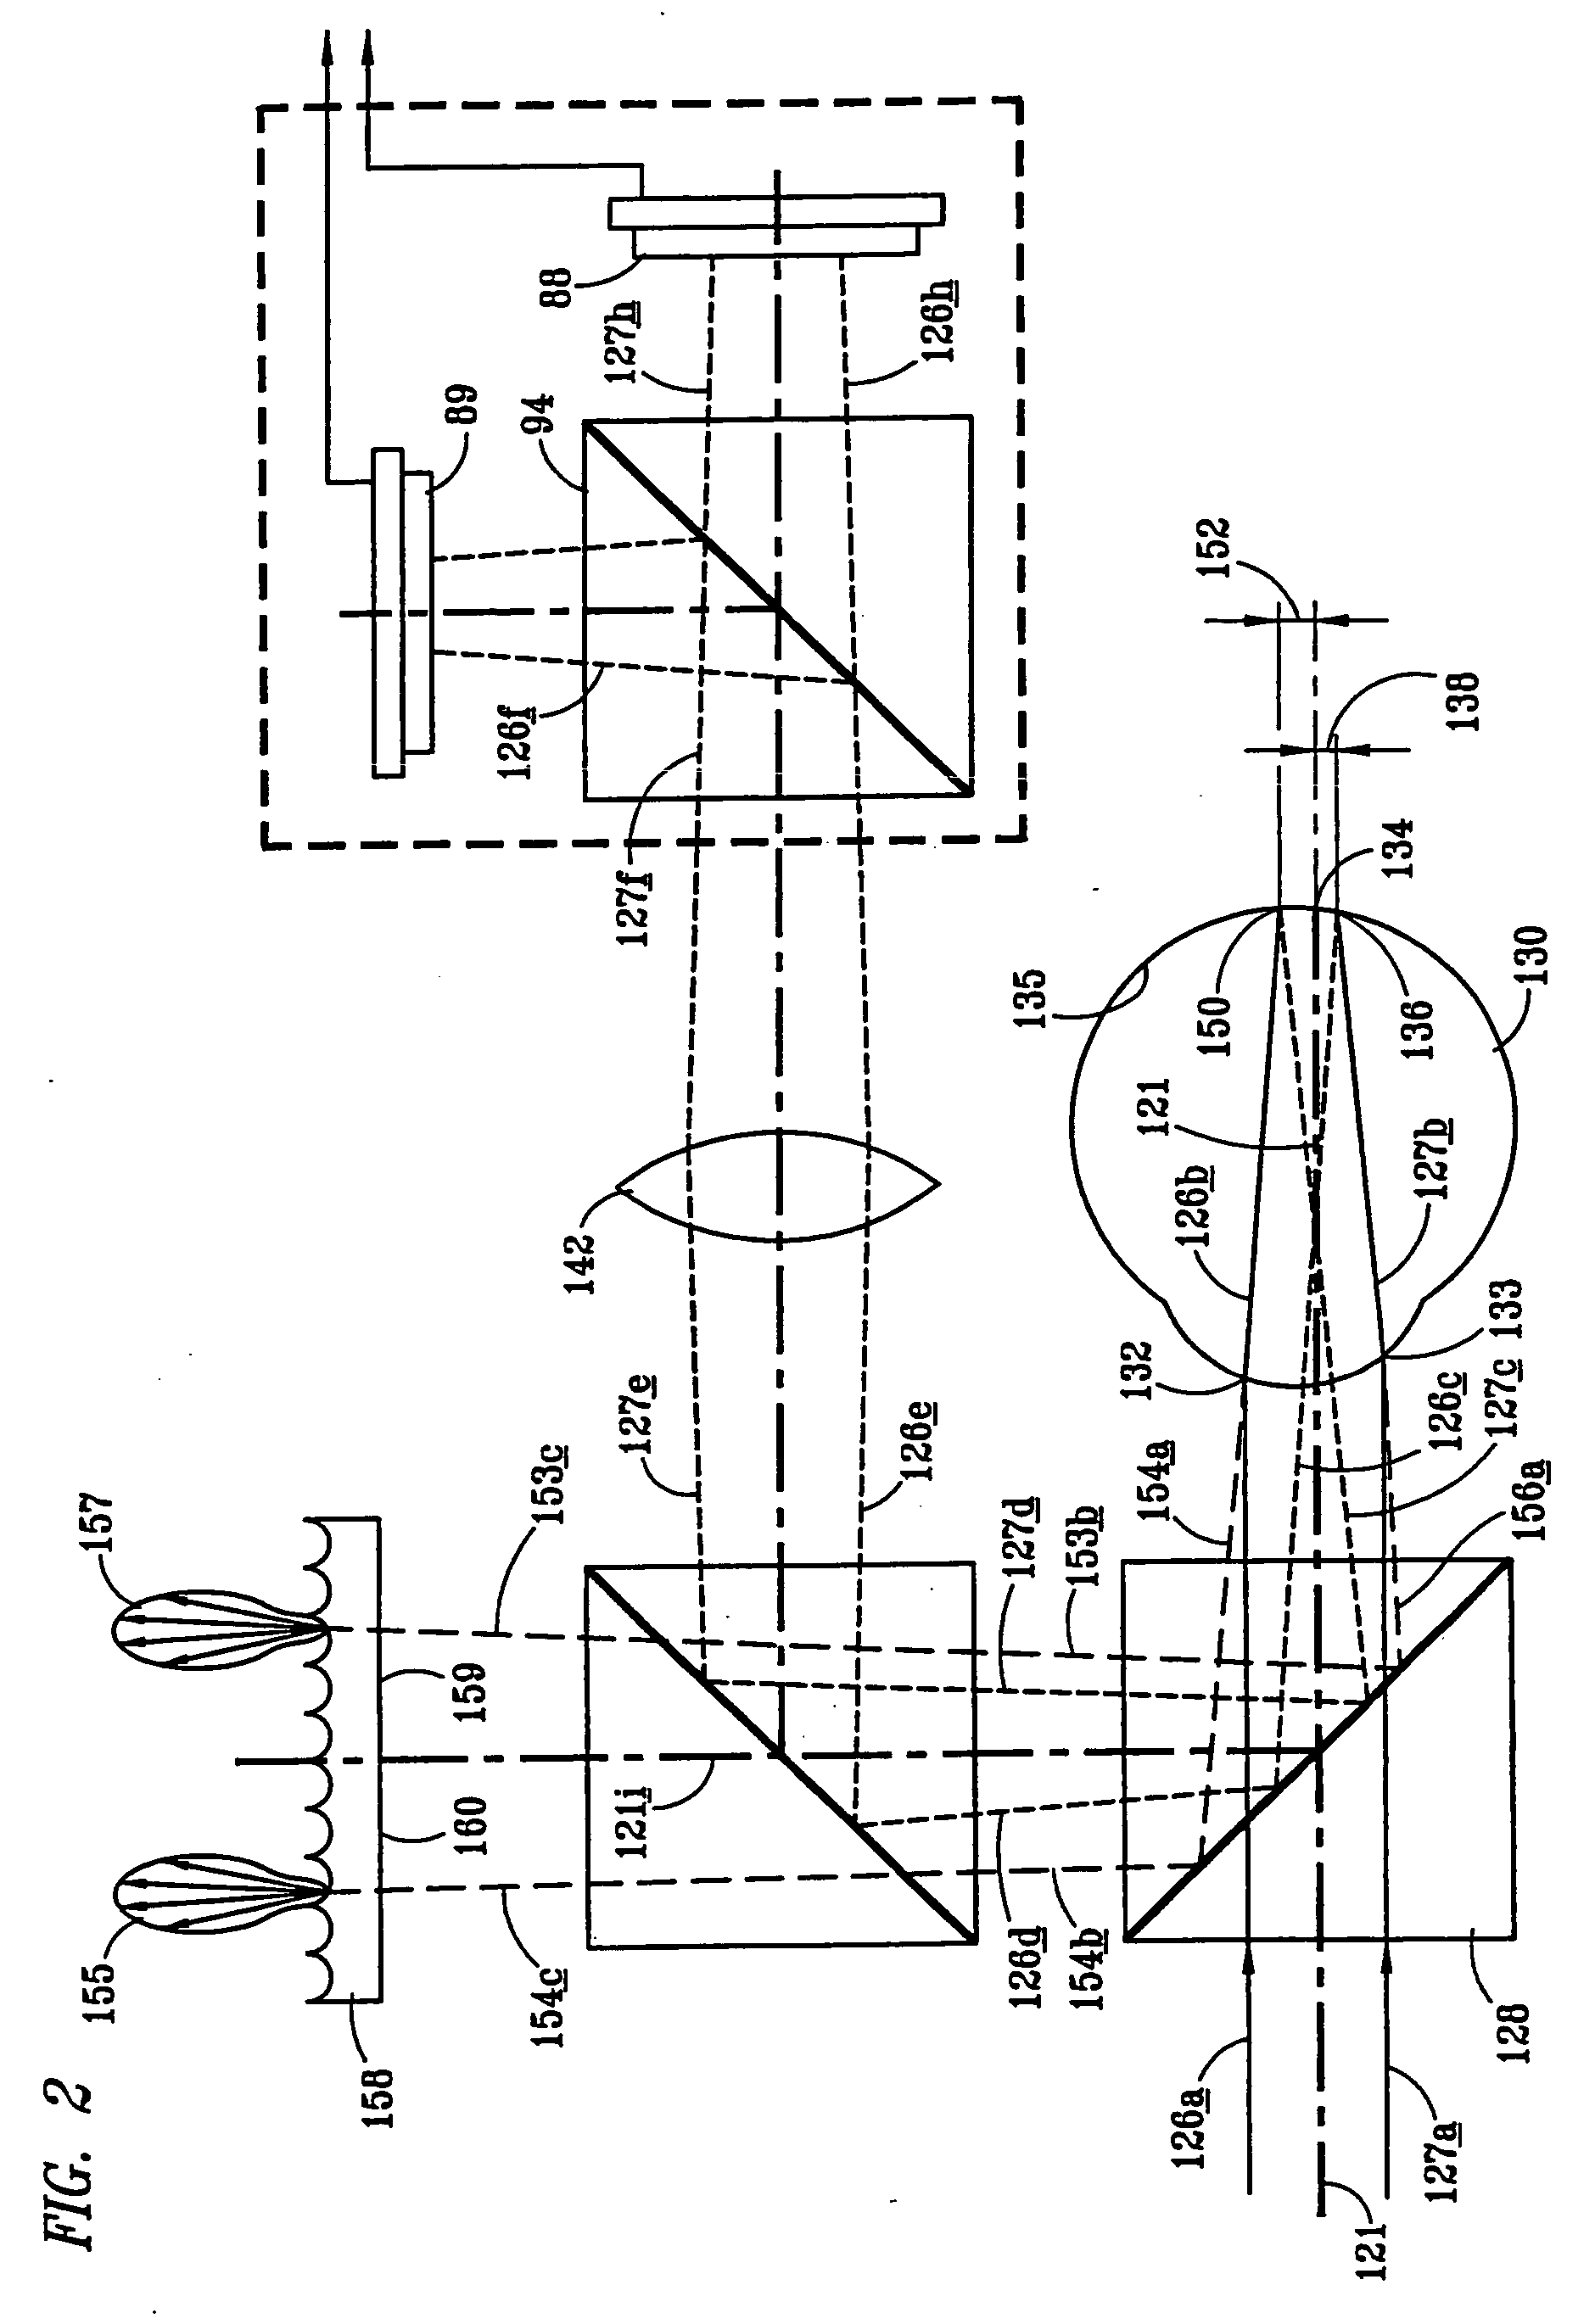 Method and device for determining refractive components and visual function of the eye for vision correction